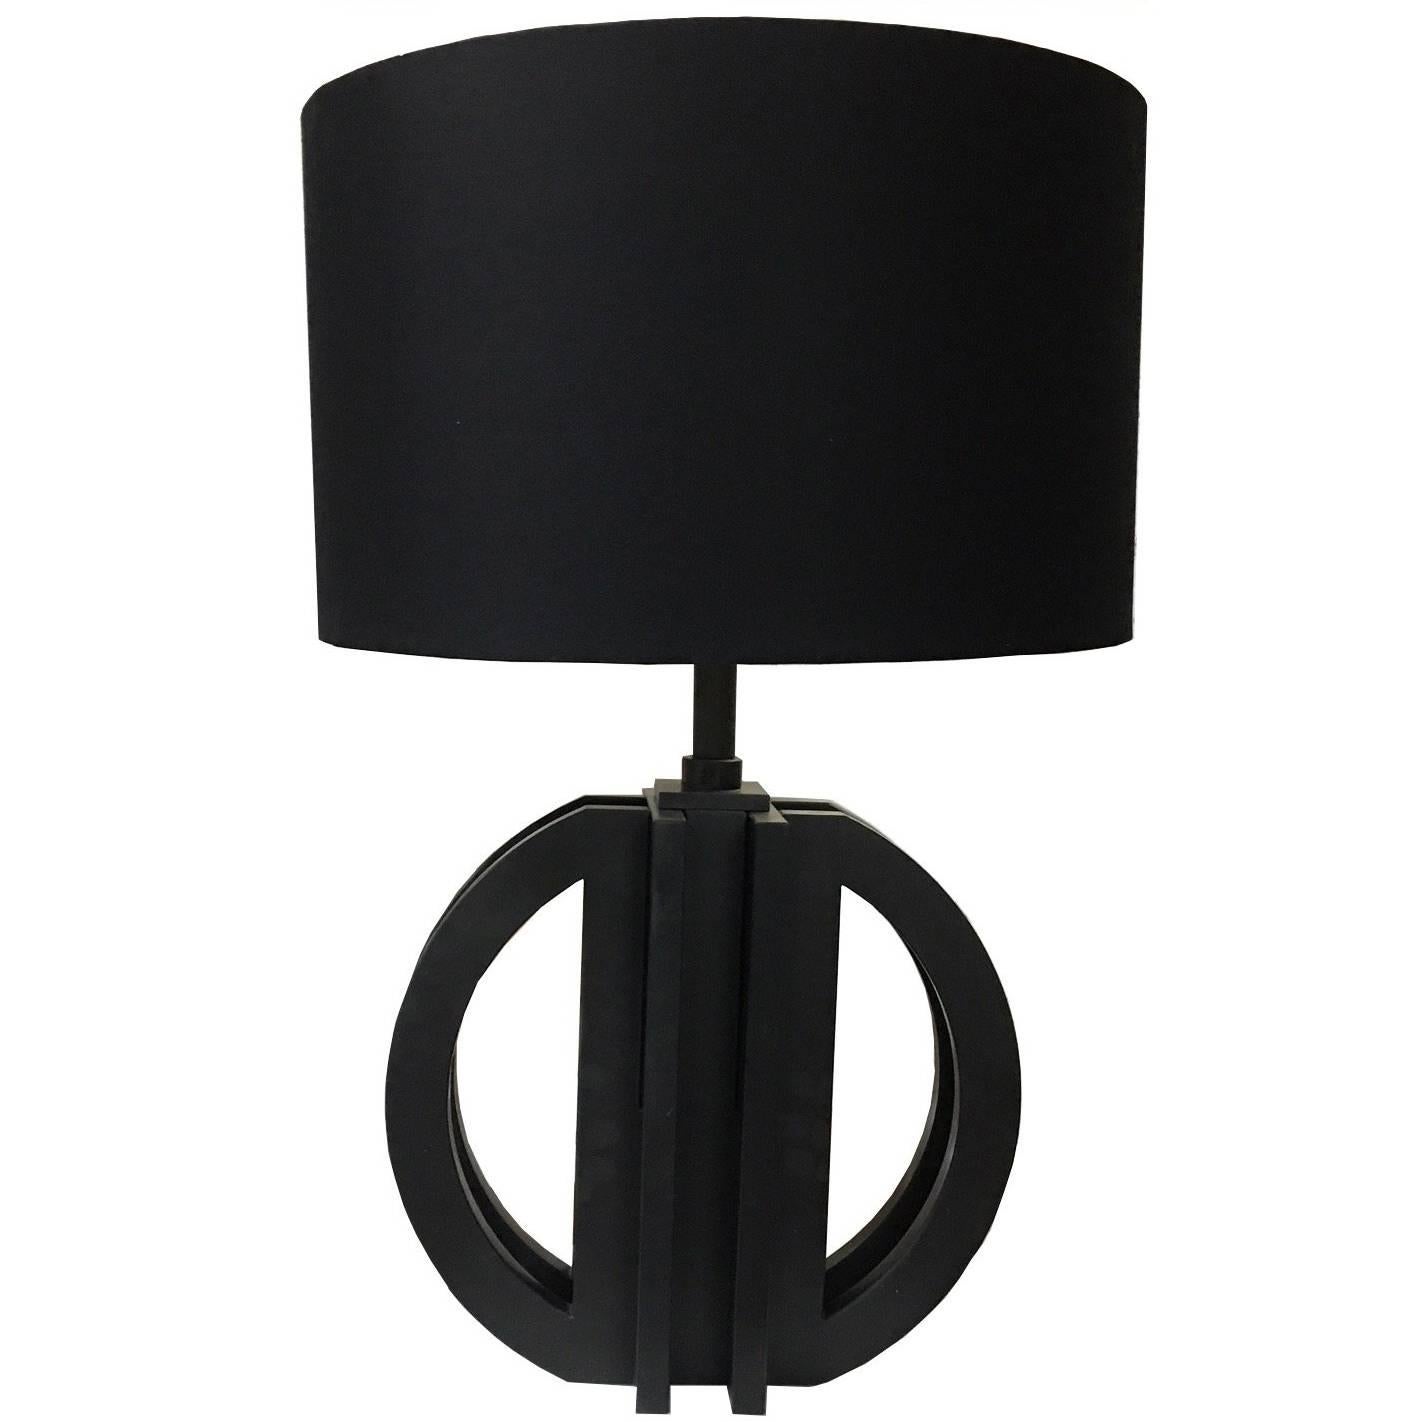 The black slate stone table lamp is part of a series of limited editions by Massimo Mangiardi. In this sculpture he uses both circular curves that inter-stack with slate columns creating a transparent yet strong stately presence, ethereal in nature.